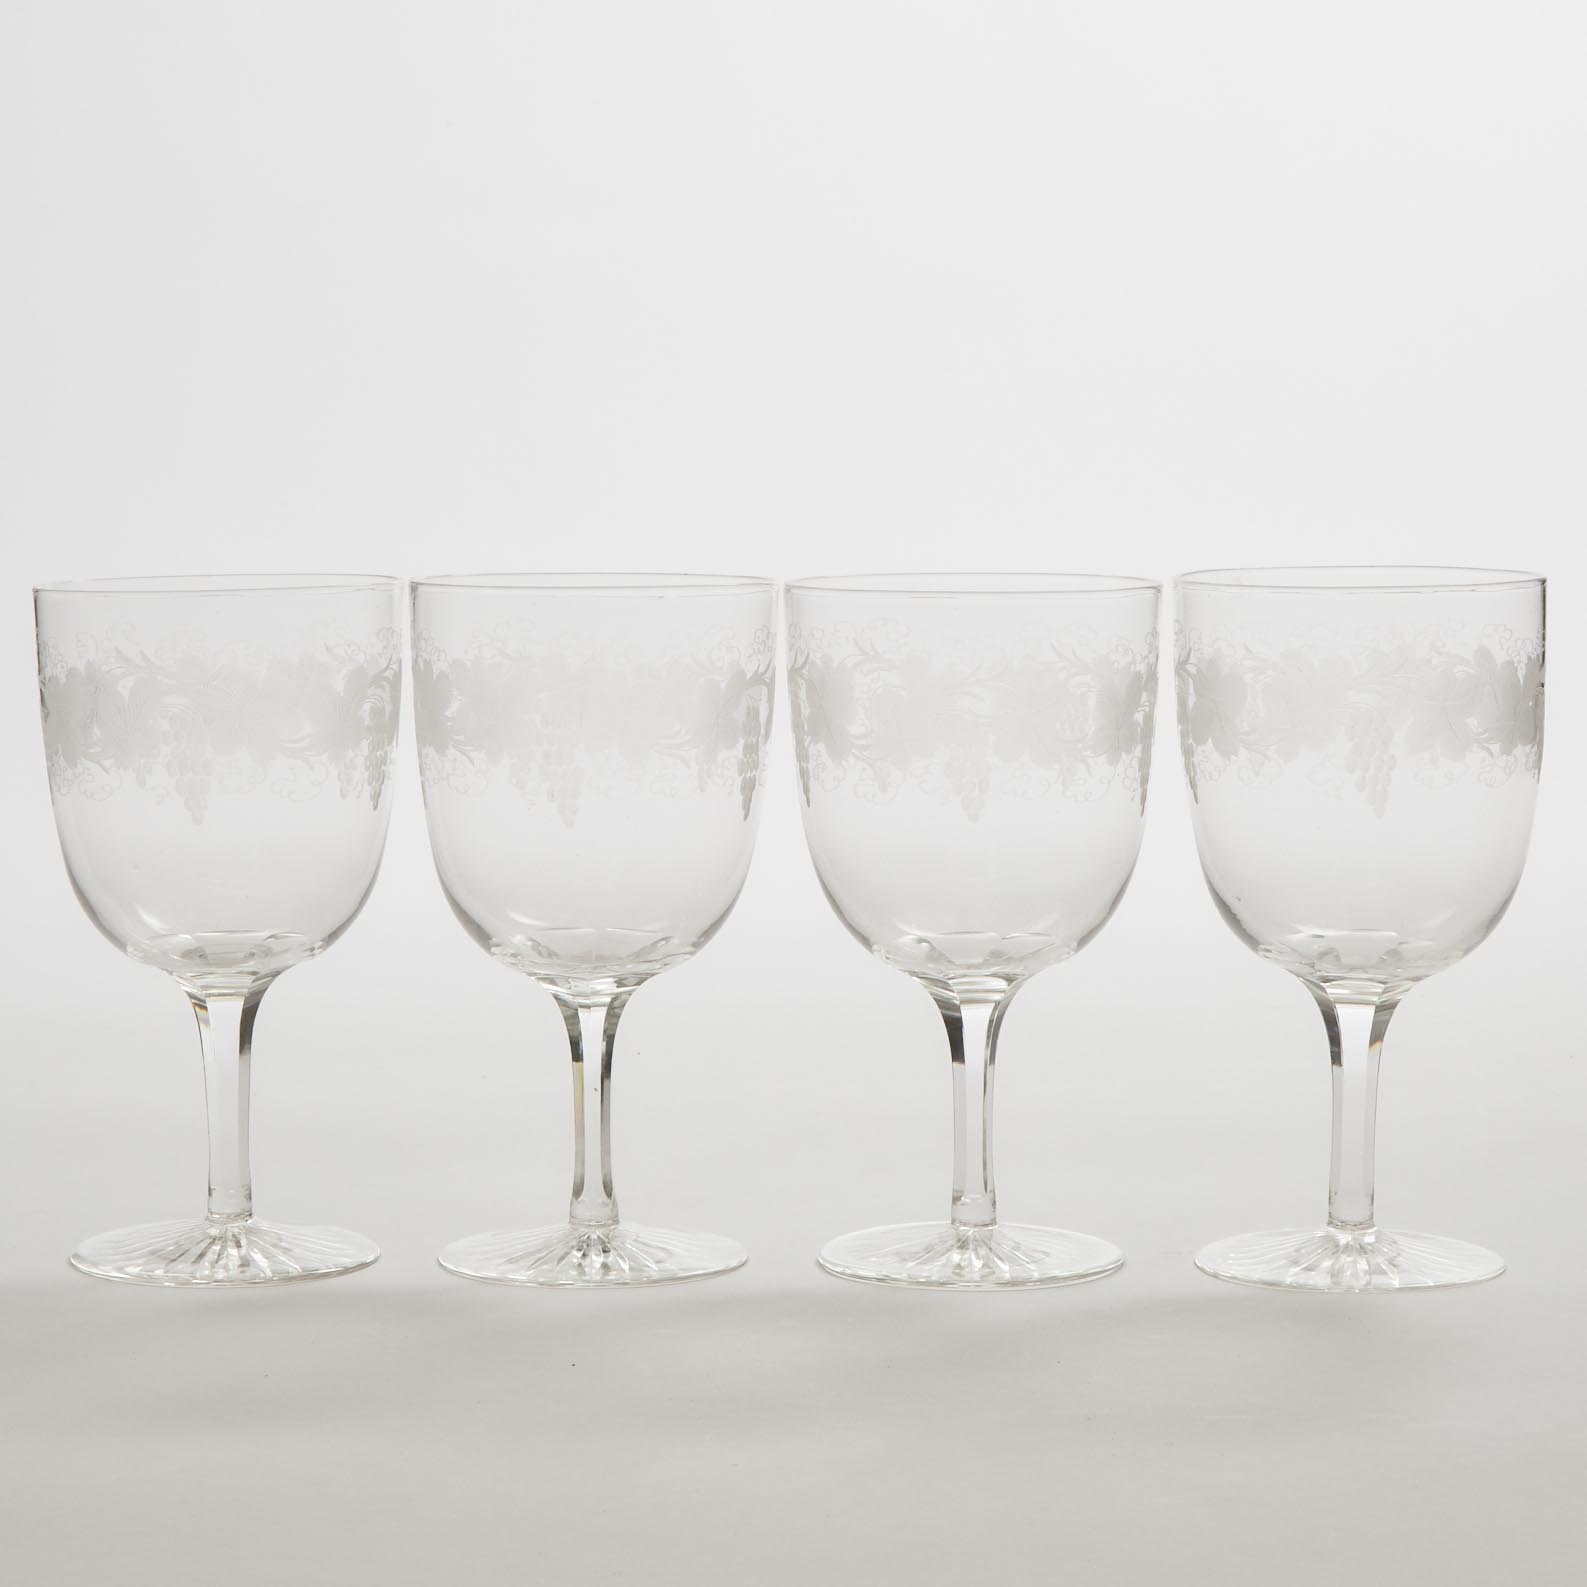 Four Bohemian Etched Glass Wine Goblets, late 19th/early 20th century